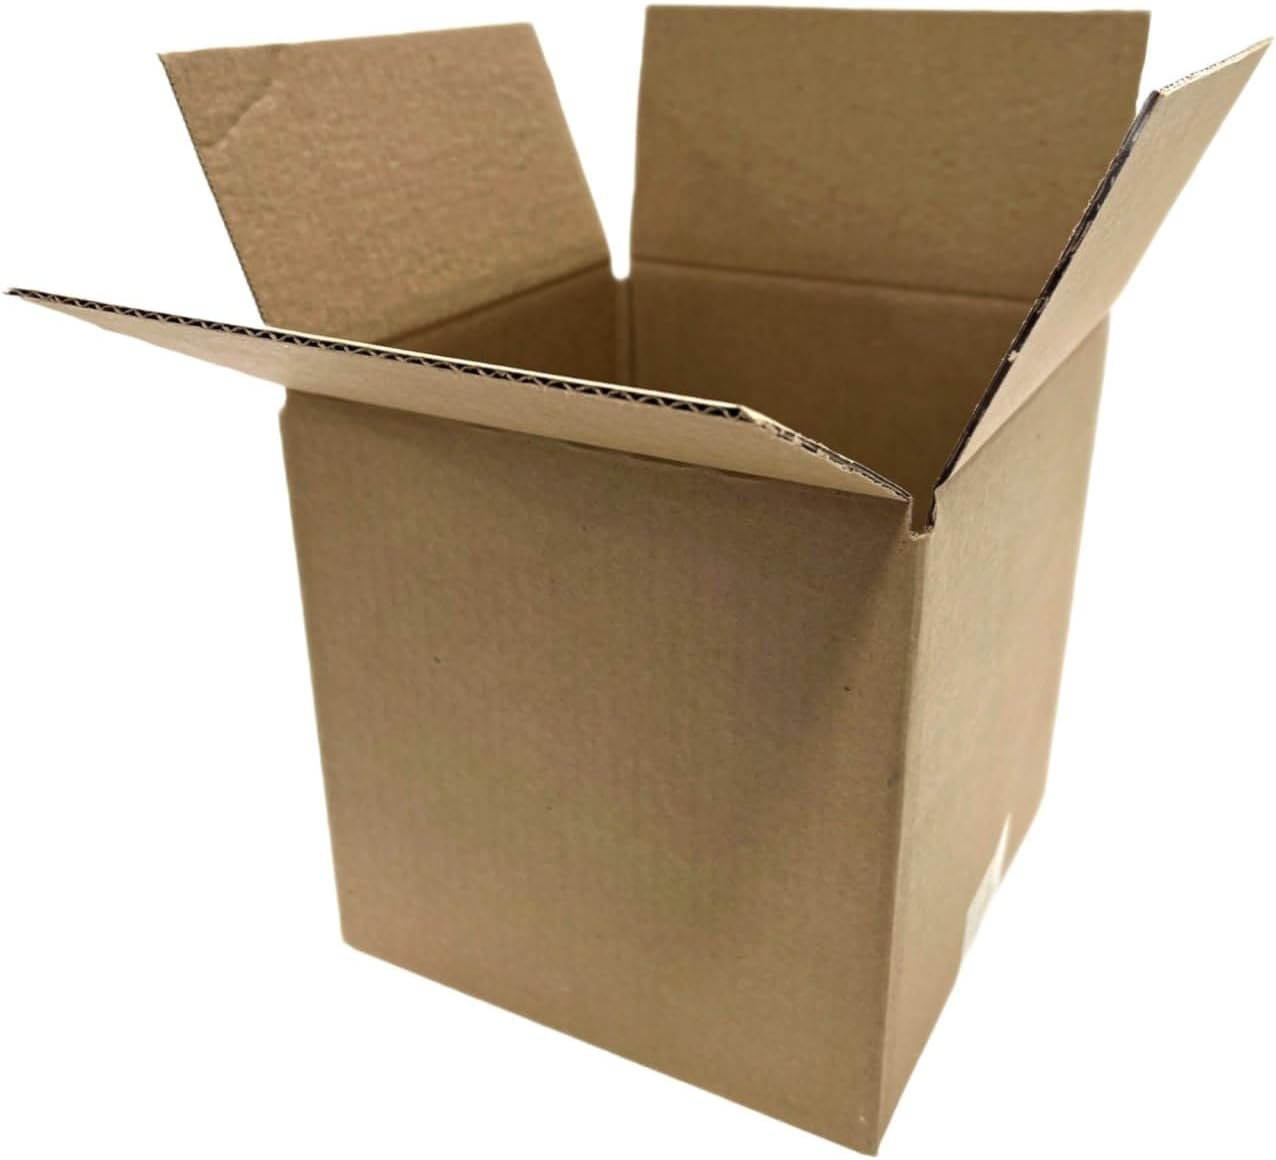 50 6x6x6 Cardboard Paper Boxes Mailing Packing Shipping Box Corrugated